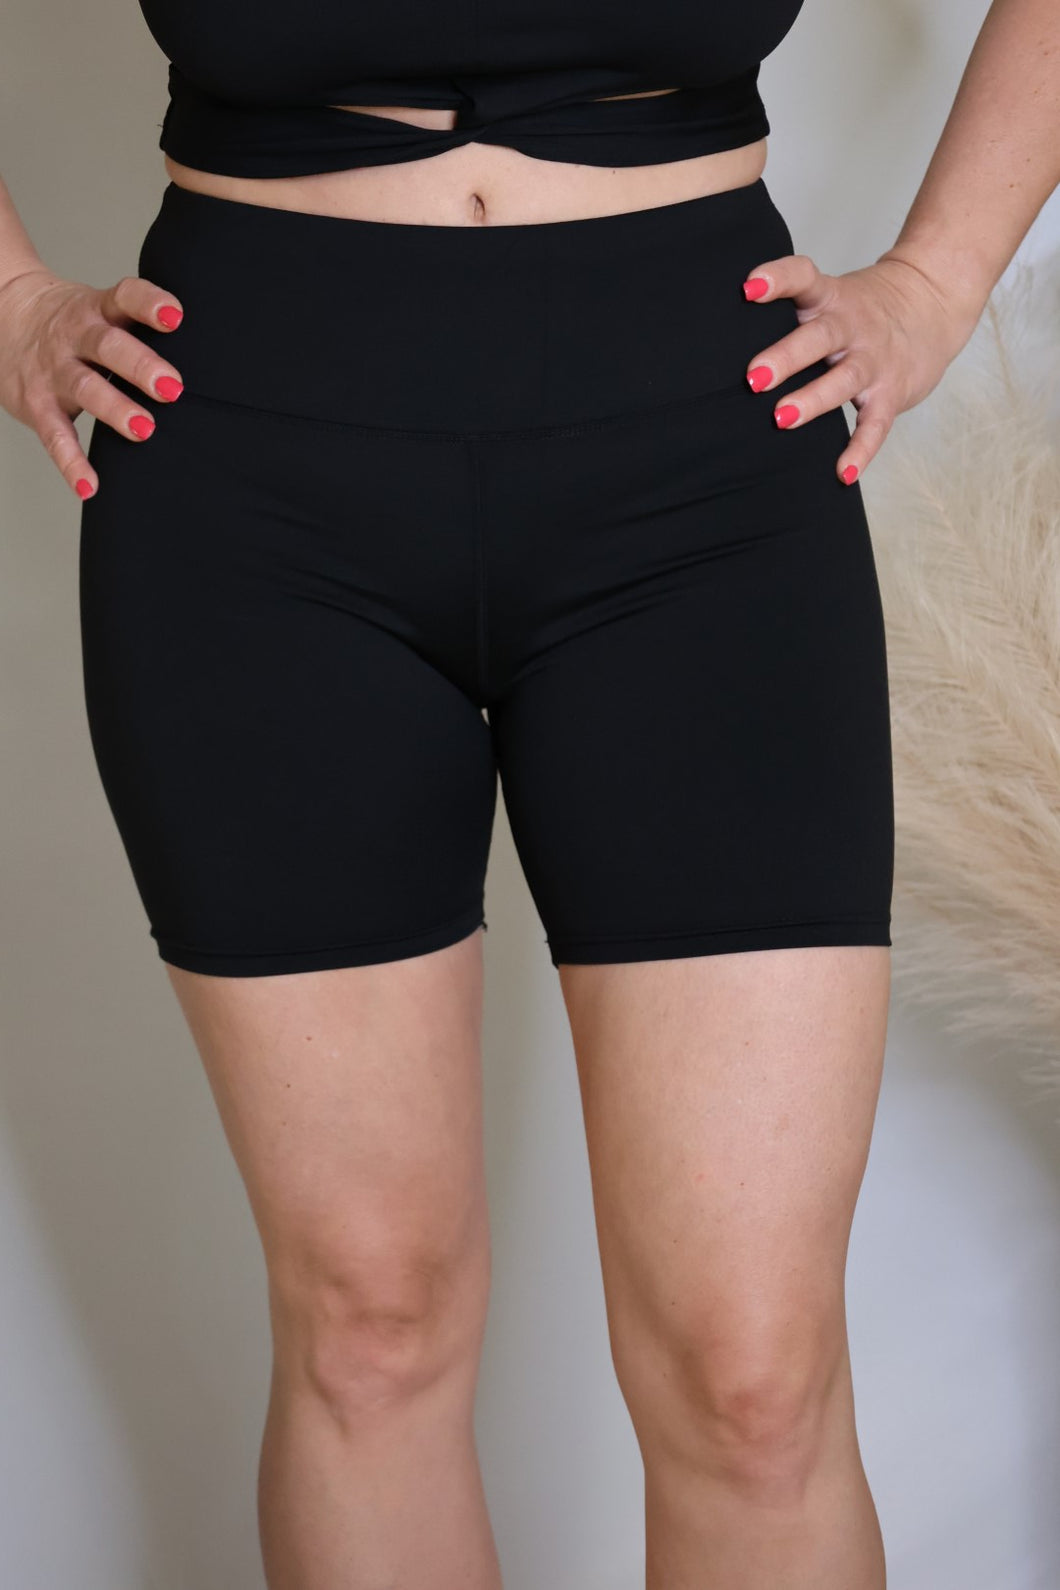 Seizing The Moment Black Biker Shorts by LuvLeigh Apparel